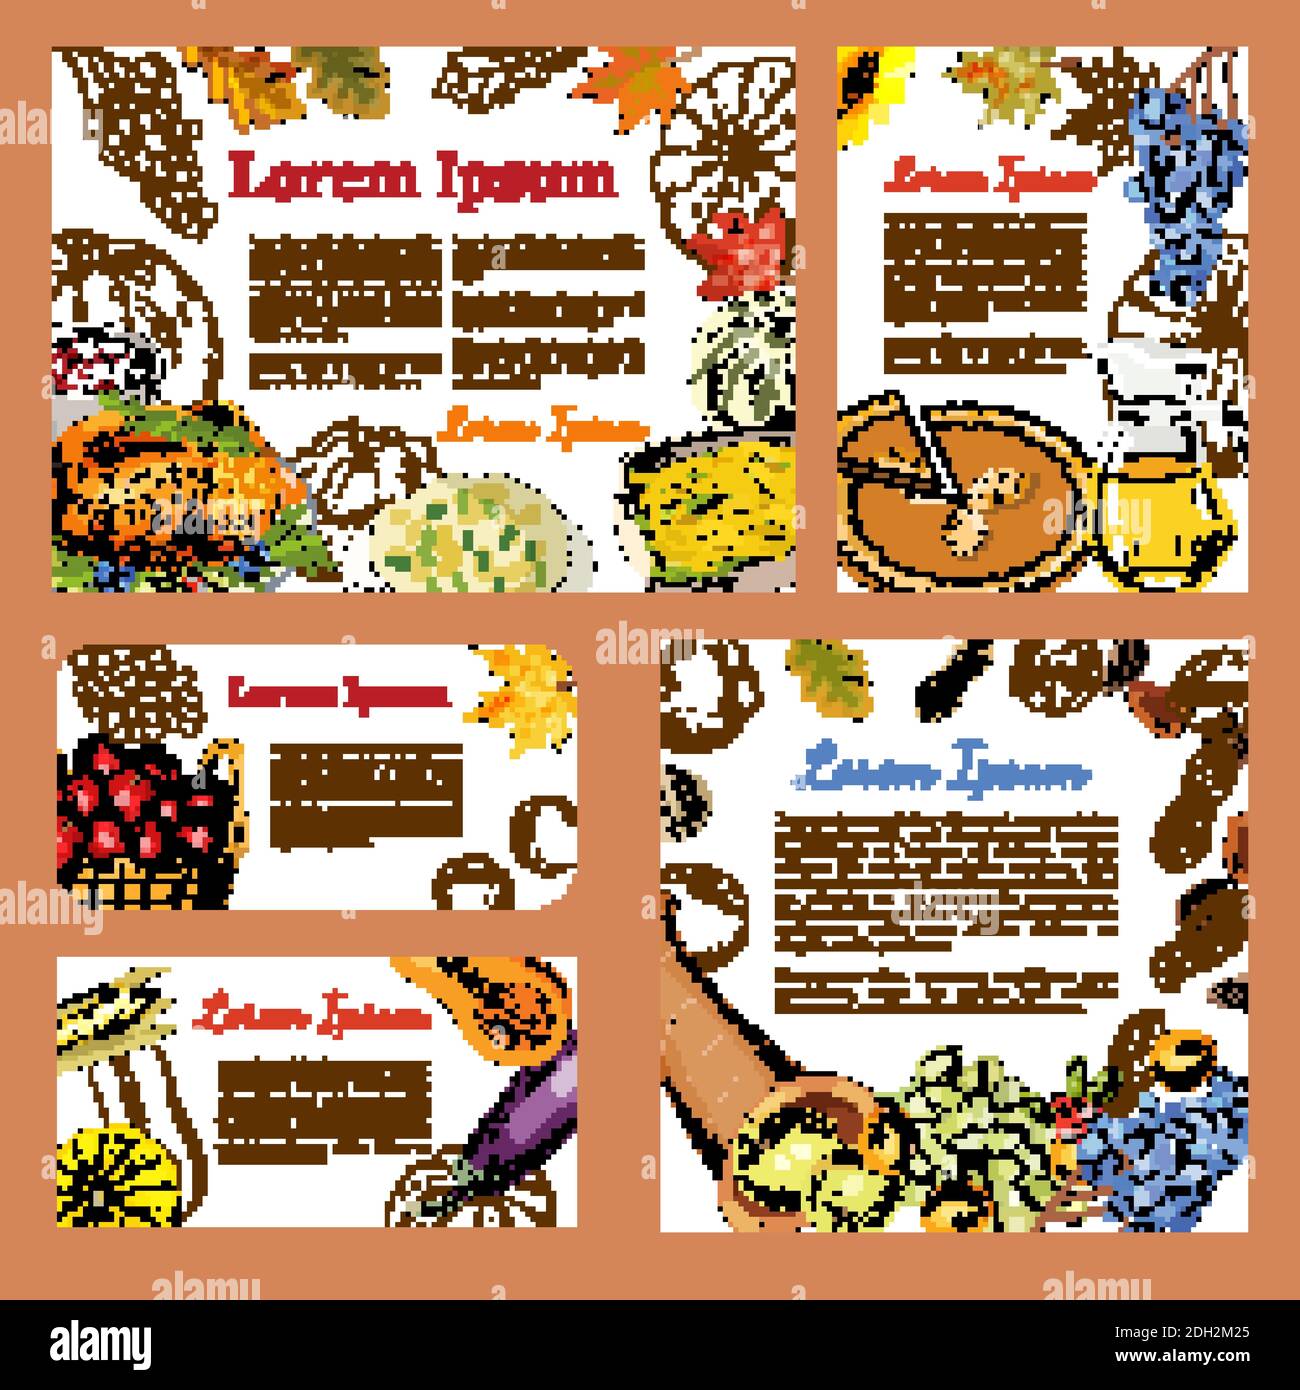 Greeting posters and banners with symbols of thanksgiving - roast Turkey, pumpkin pie,pumpkin, cranberry sauce, mashed potatoes, green beans, mashed p Stock Vector